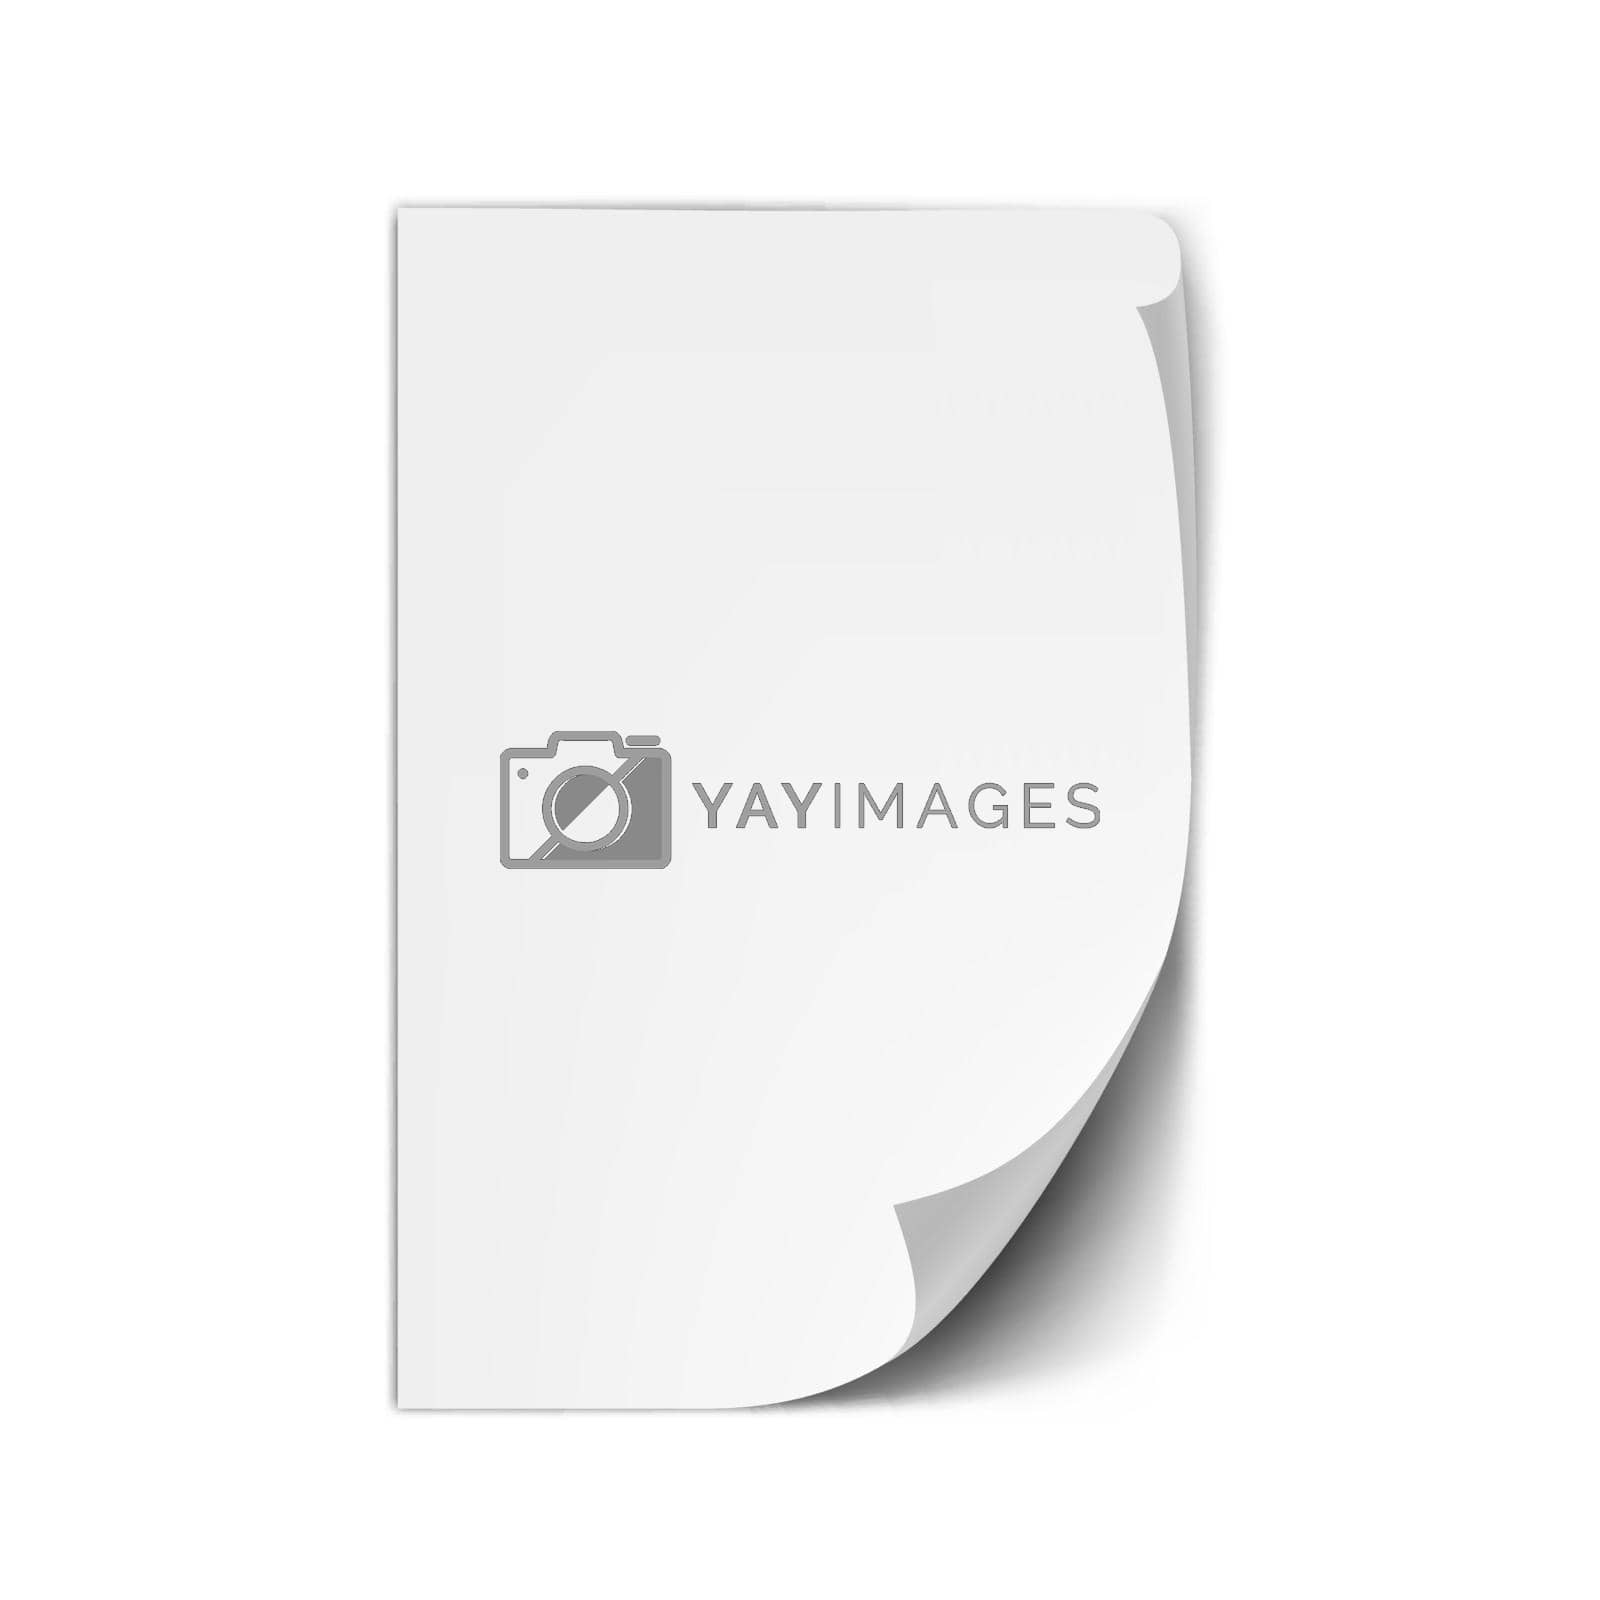 Royalty free image of Realistic Vertical Sheet Of Paper A4 Size by VectorThings